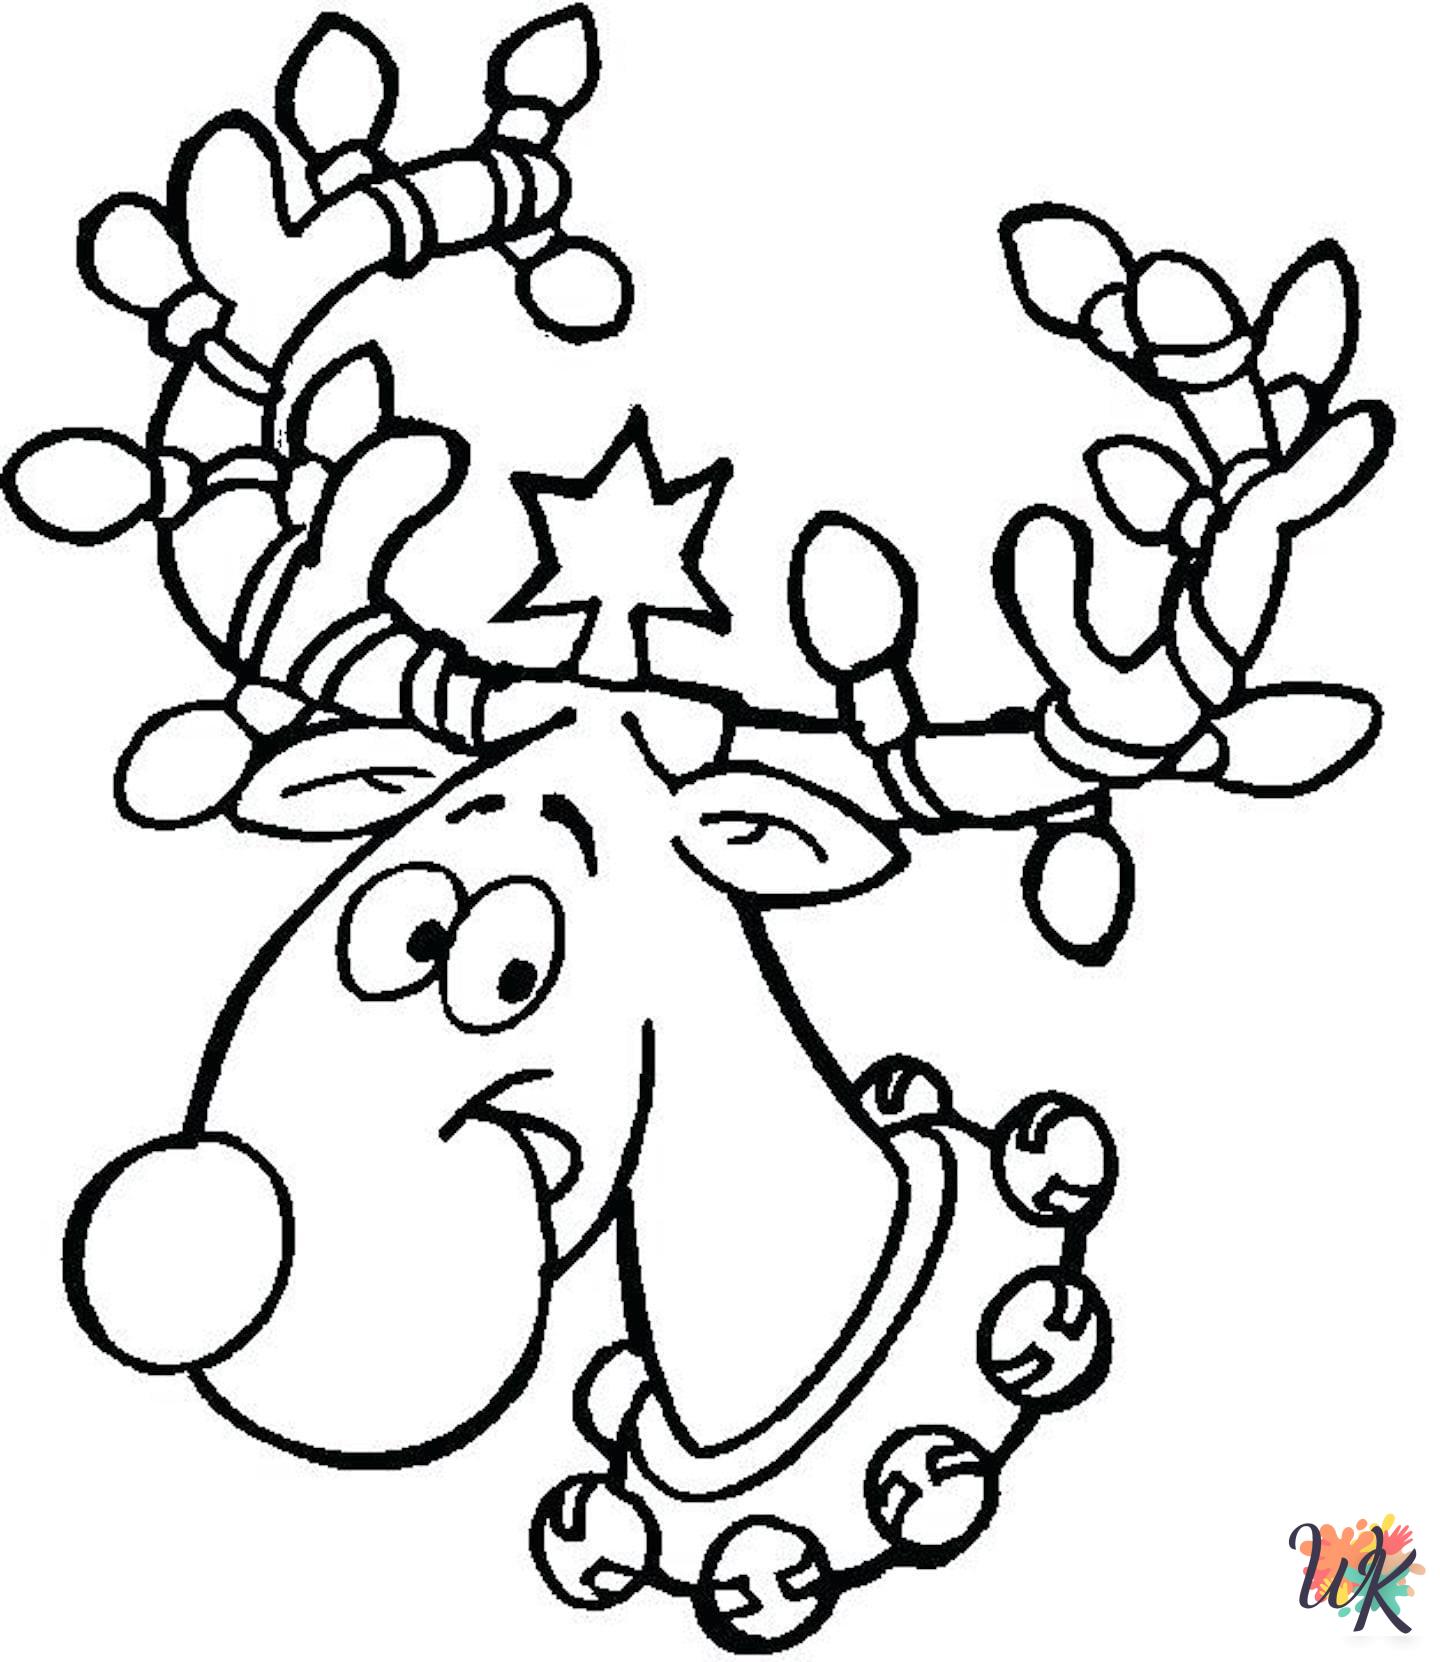 merry Santa coloring pages